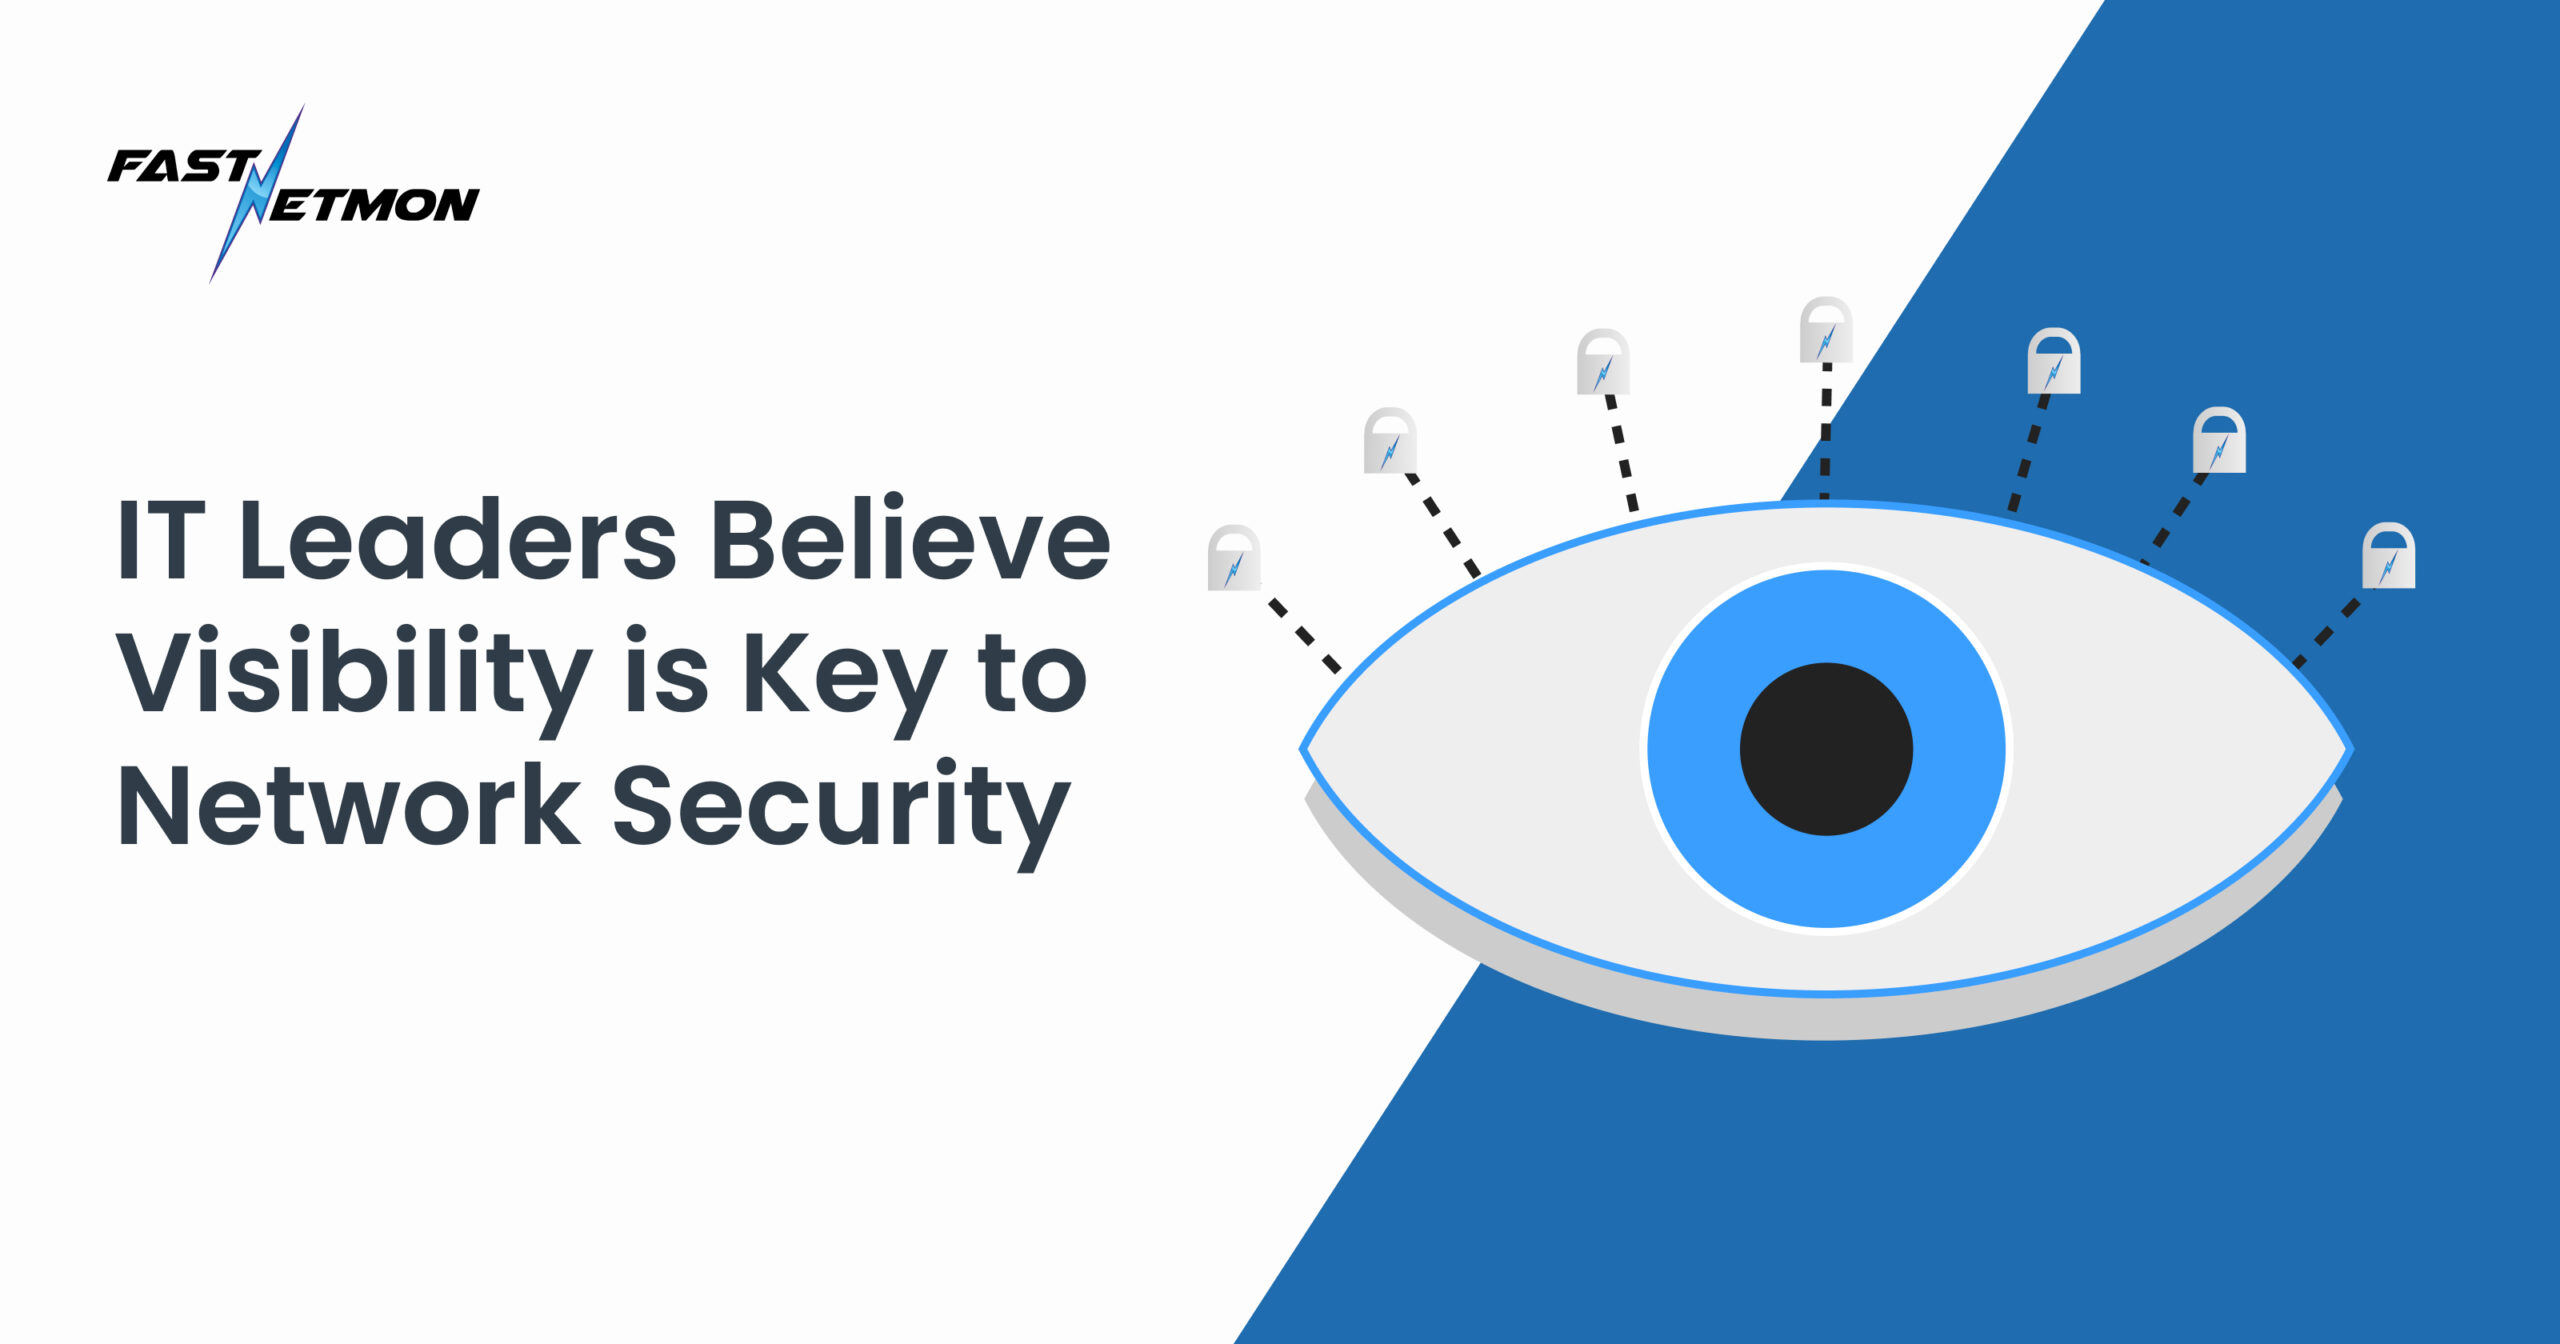 Visibility is key to network security